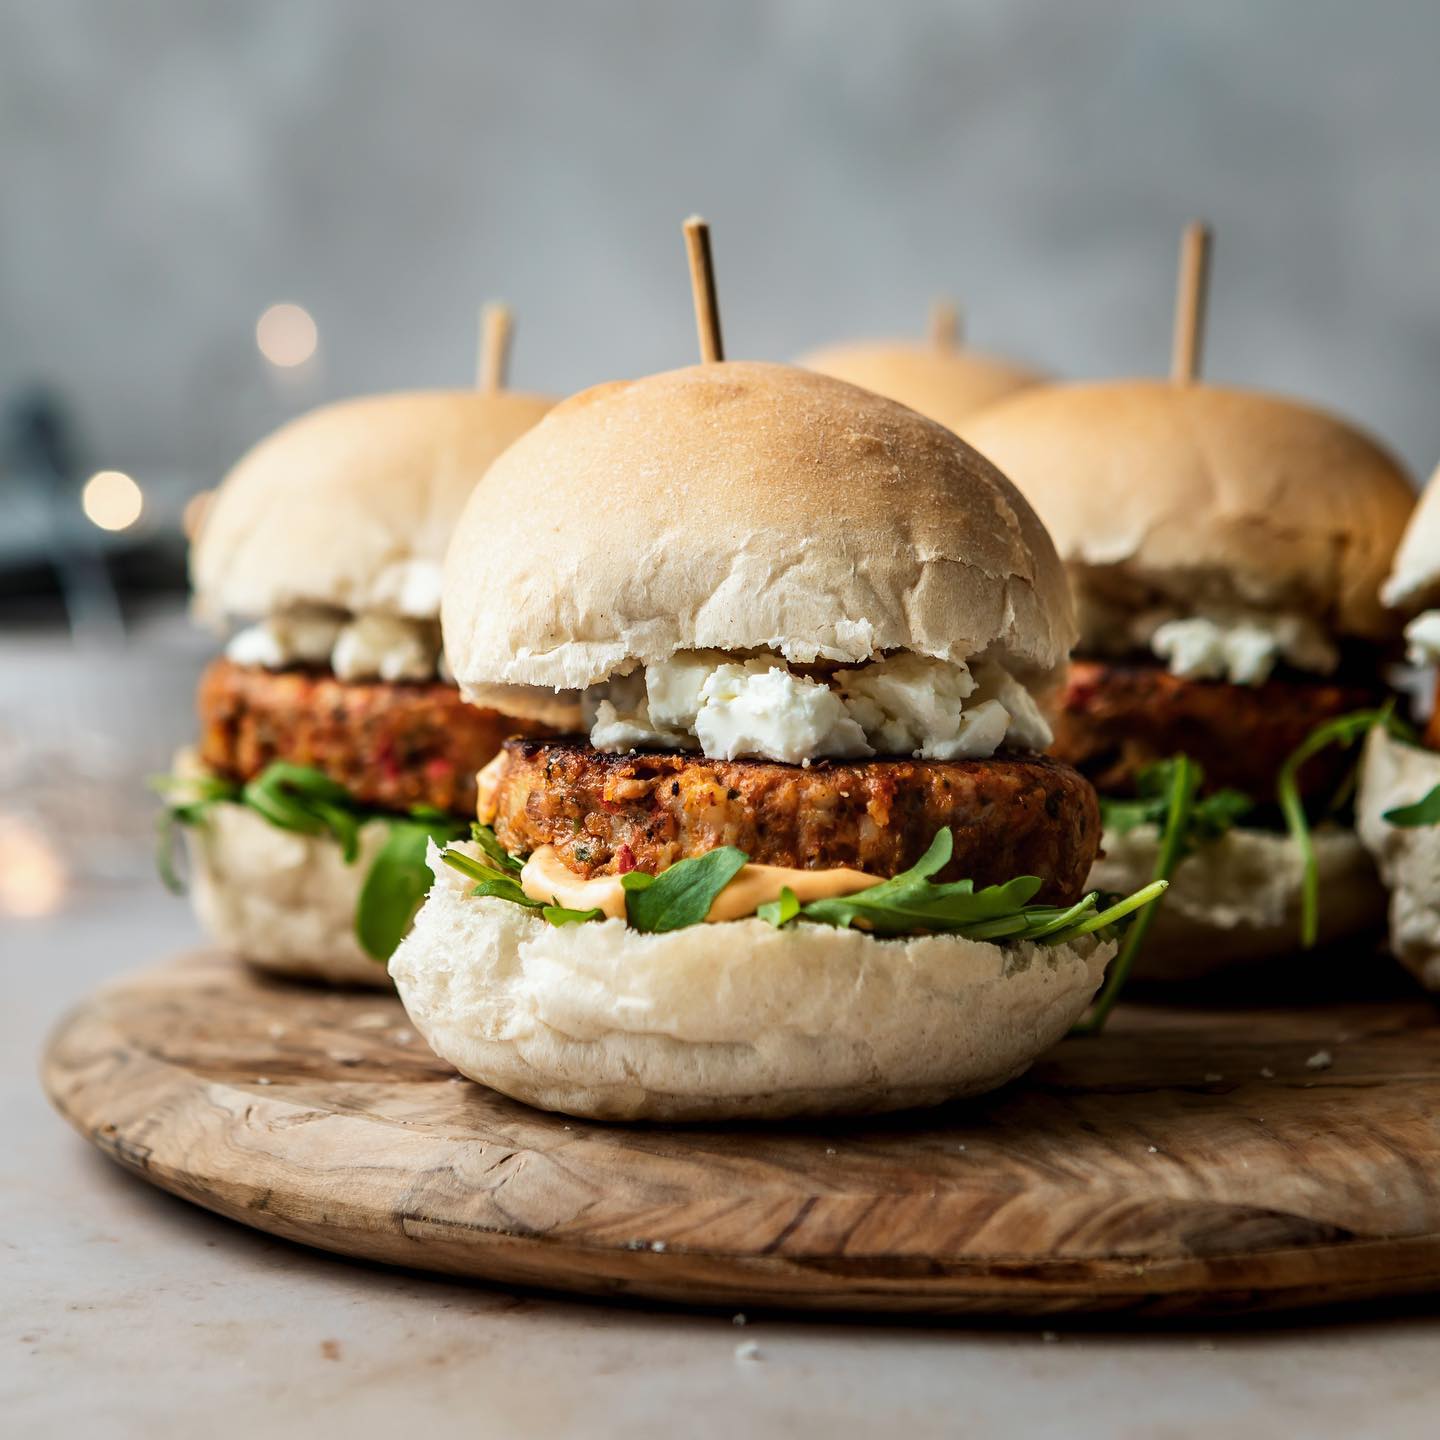 Red Pepper & Feta Chicken Burger Sliders. The perfect addition to your Christmas buffet and super simple too! Served with spicy sriracha mayo. Head @heckfooduk for the full recipe! ✨
.
Ad- paid to create recipes for Heck